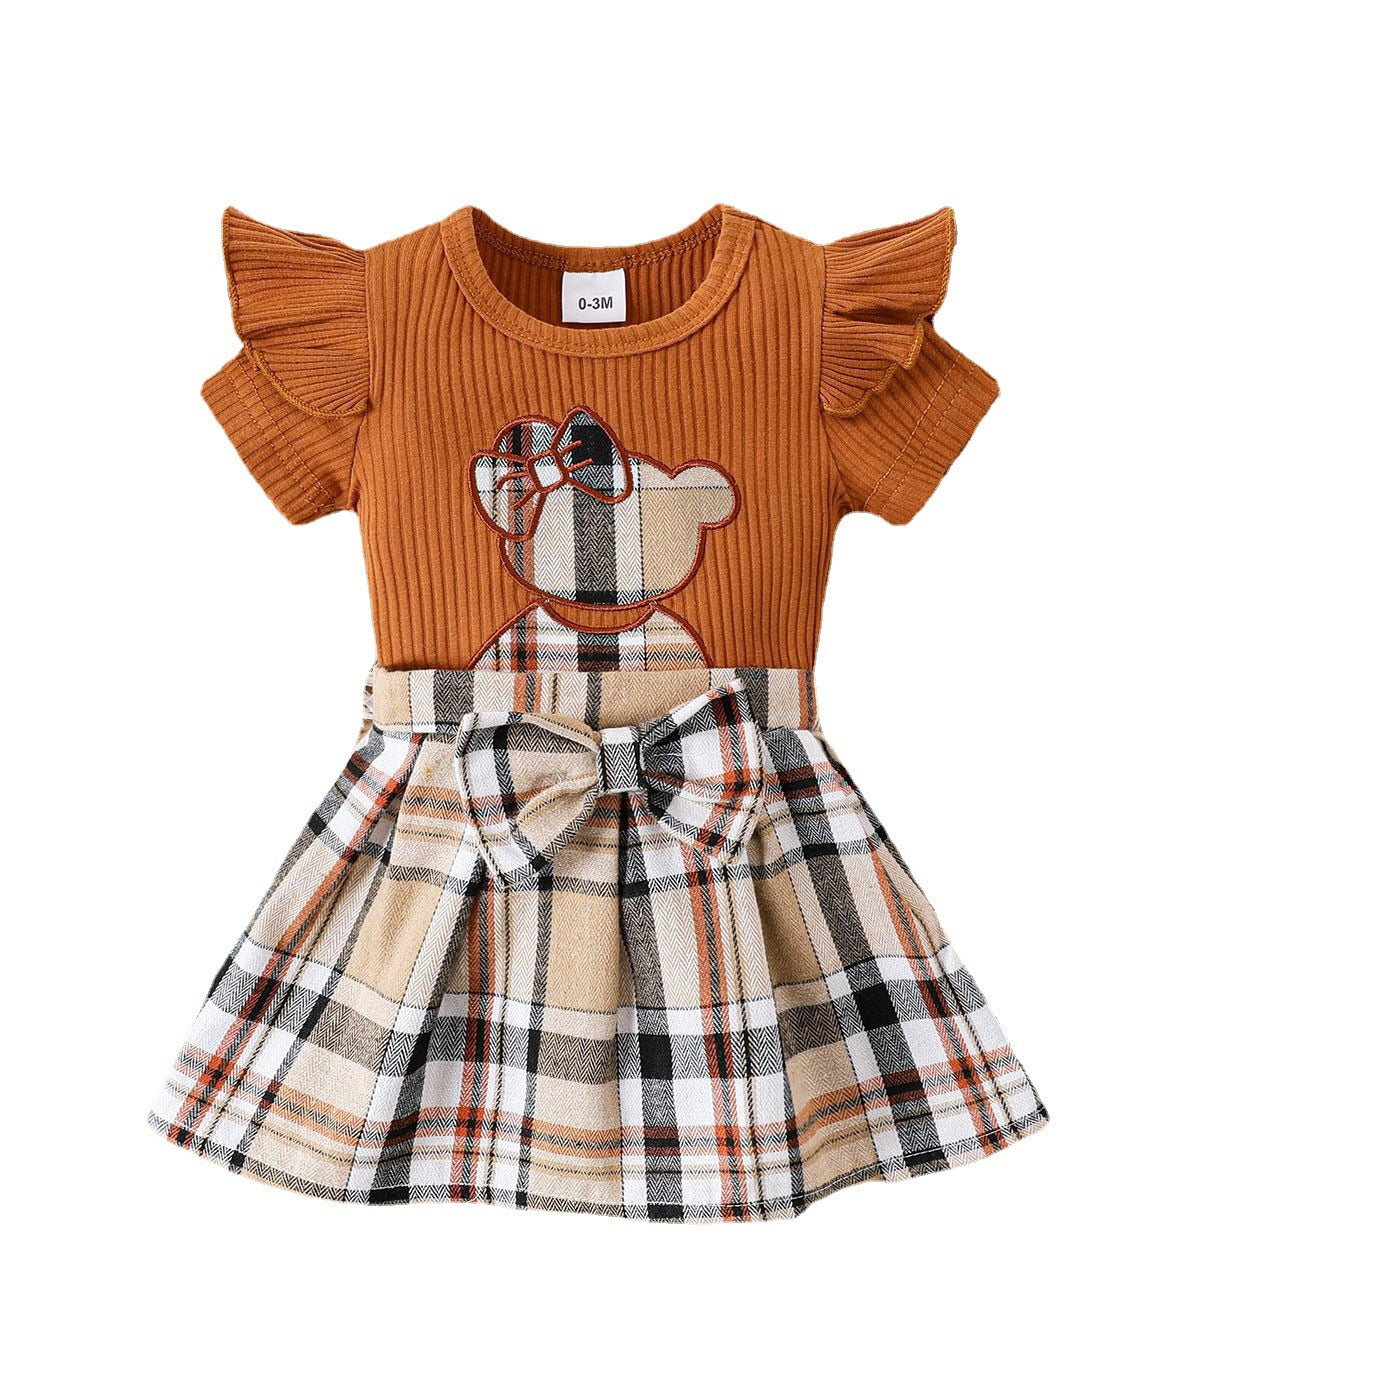 Cute Summer Baby Girl Outfit Set with Embroidery Bear Romper and Plaid Skirt